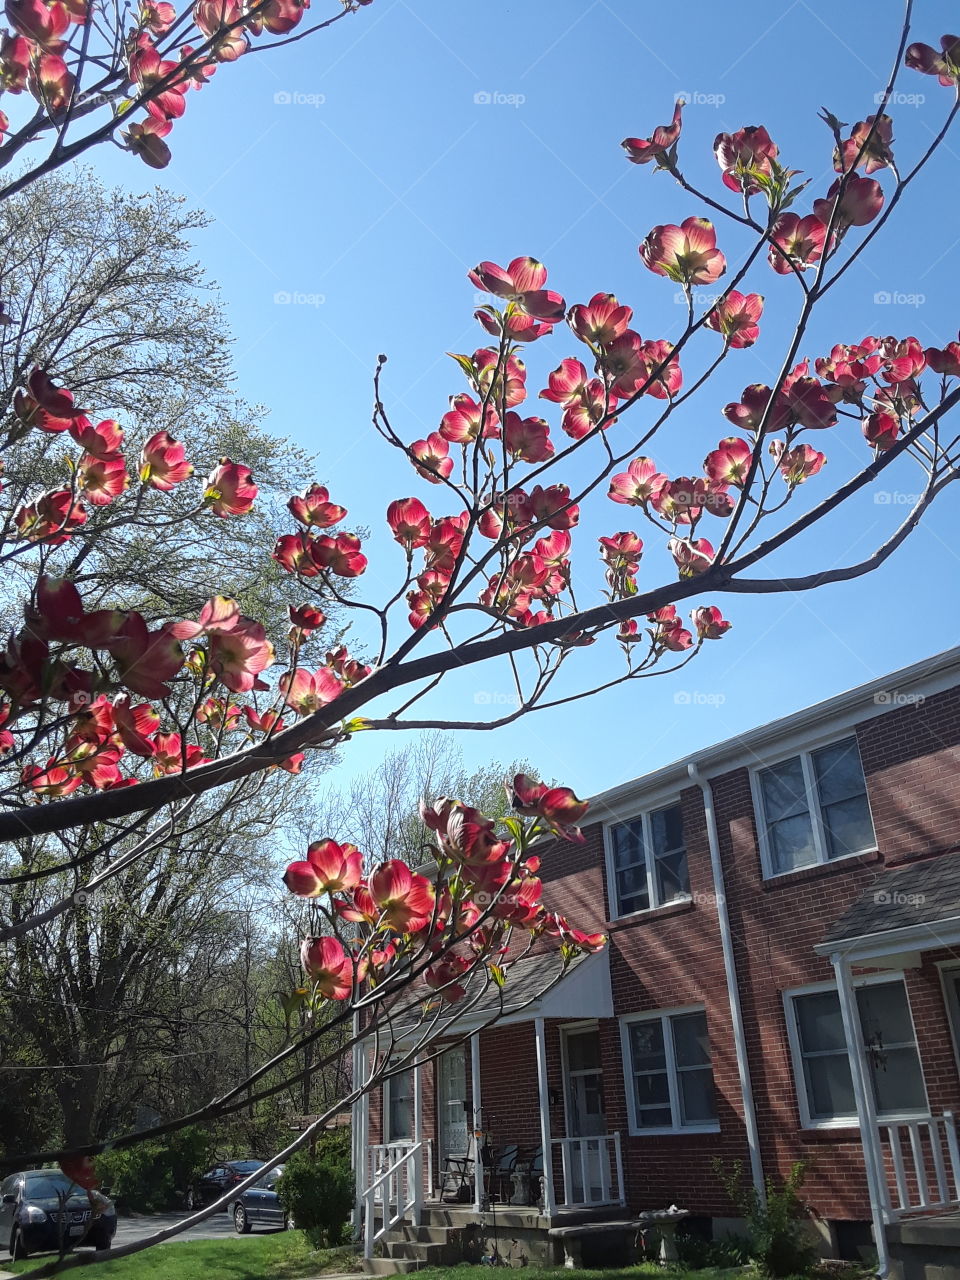 Pink Dogwood Blossoms with very blue sky and brick building